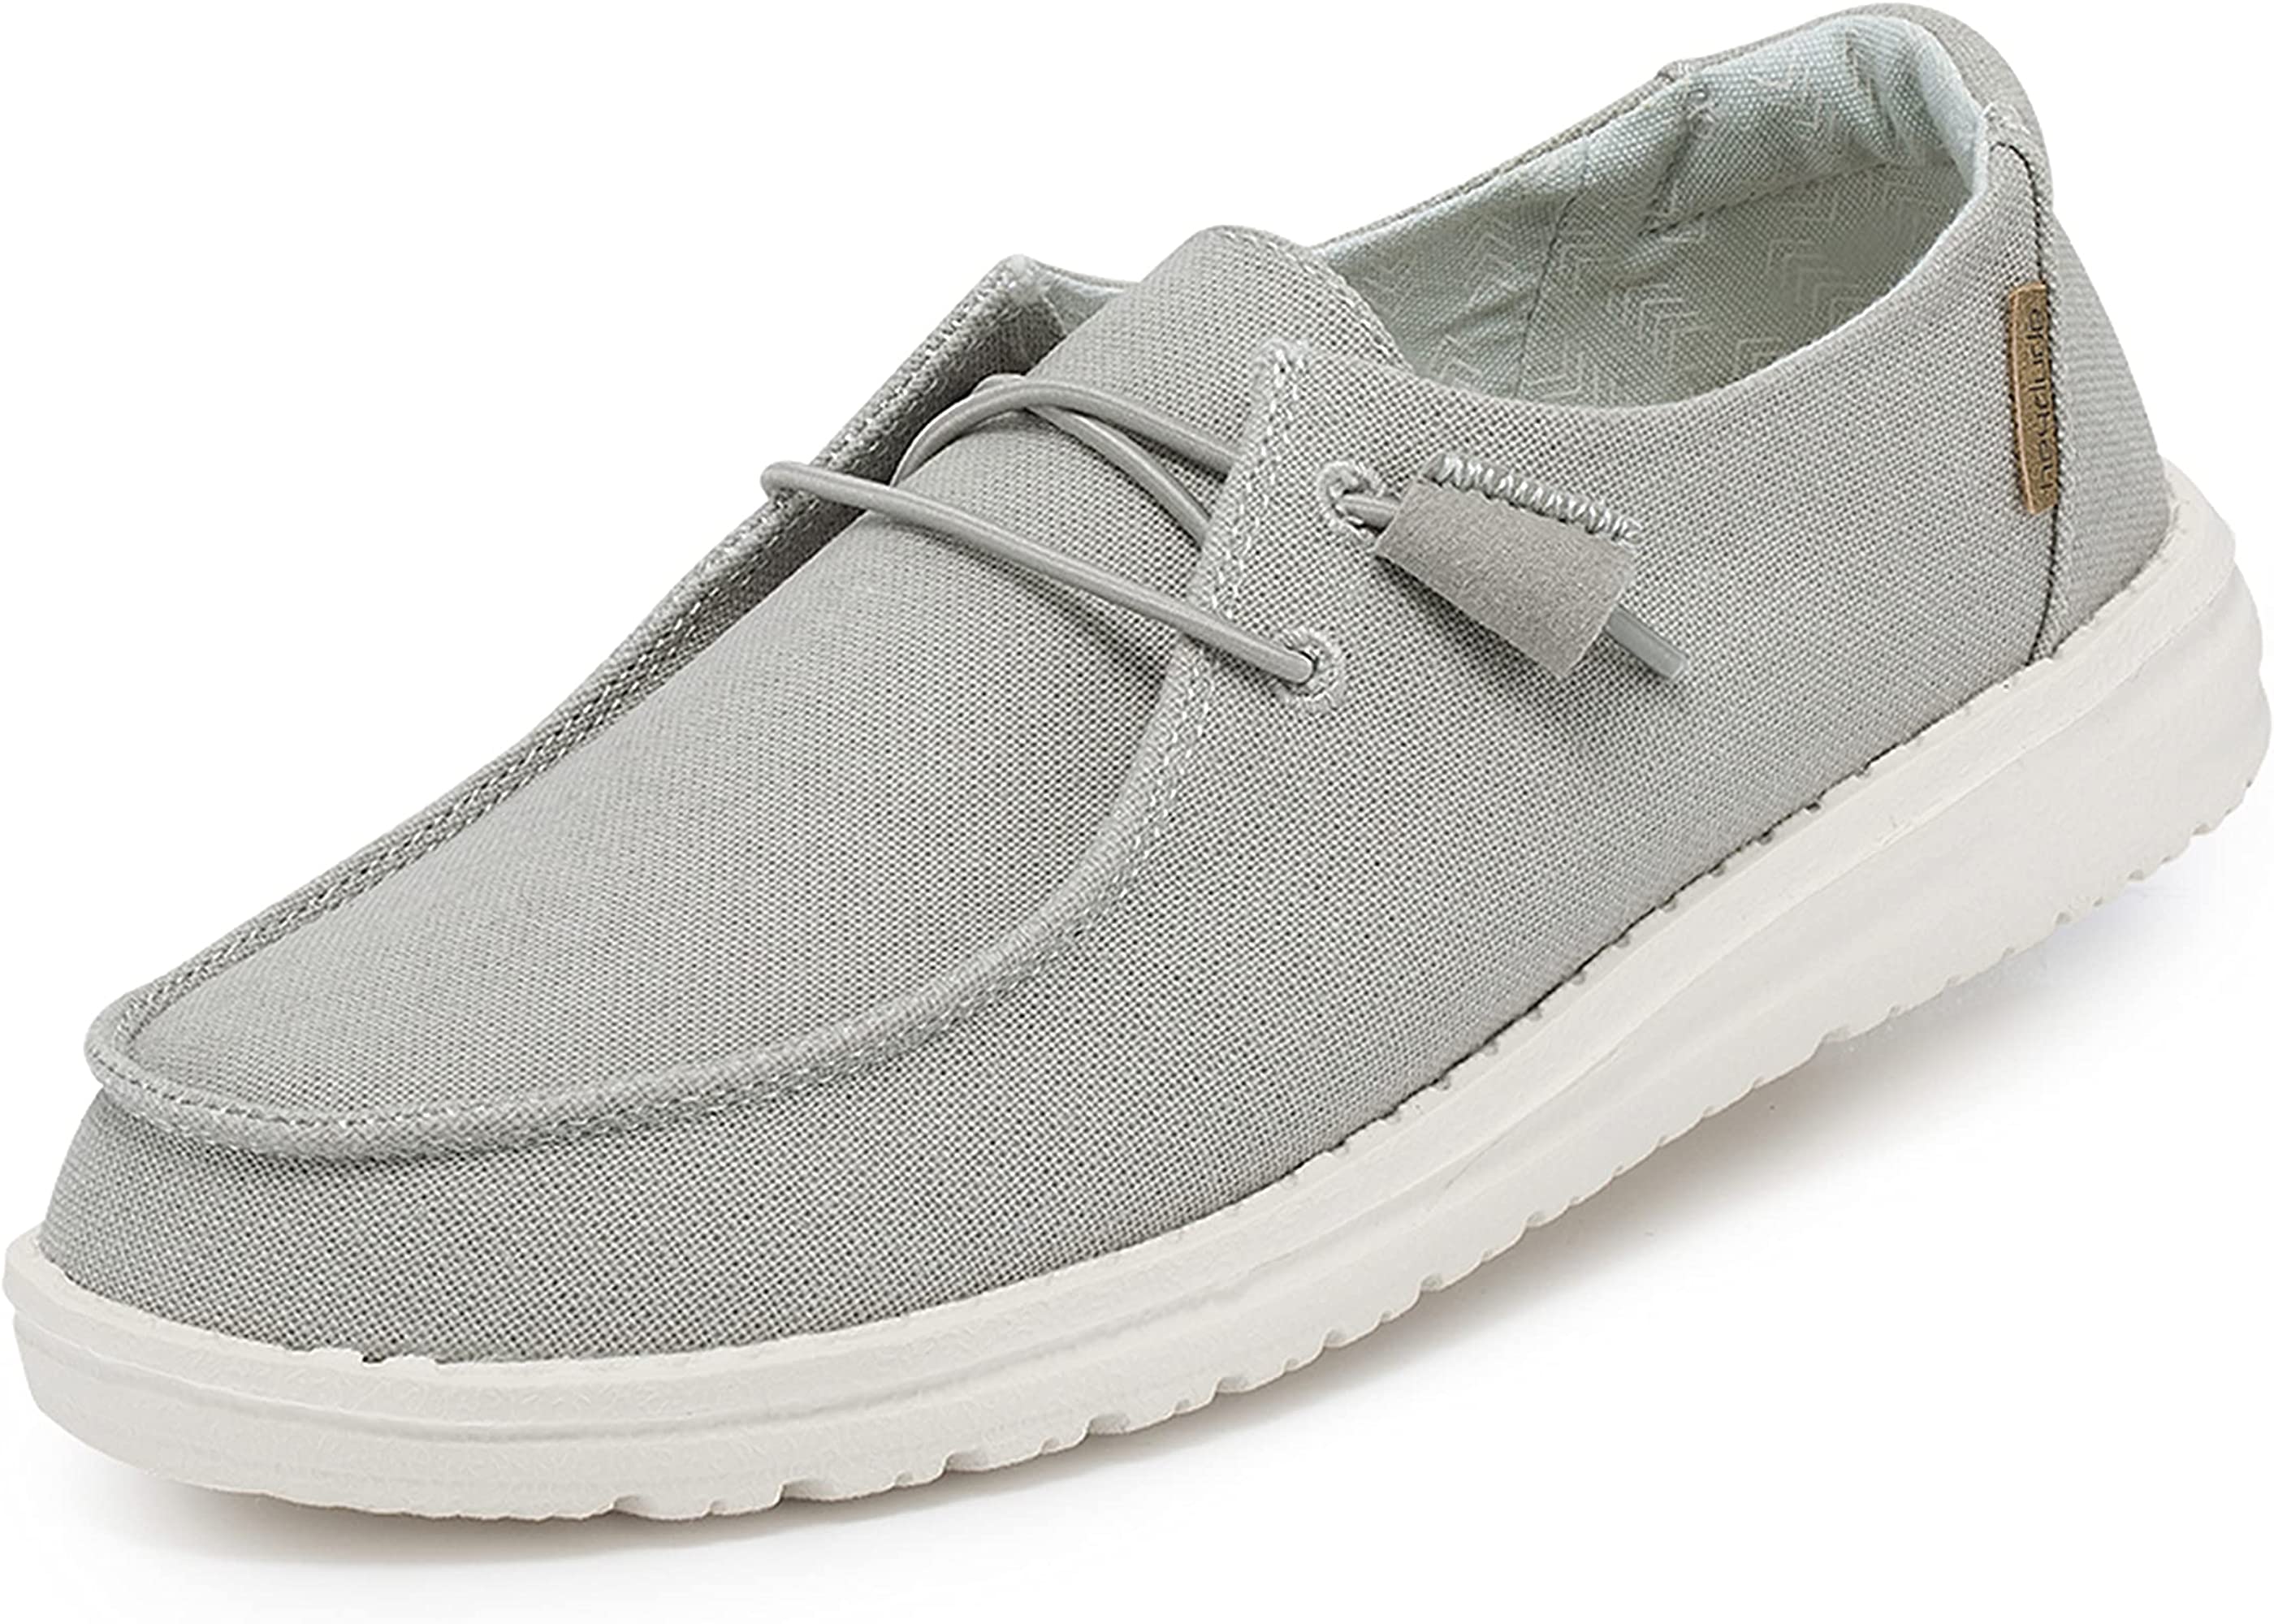 Hey Dude Womens Wendy Loafer - Chambray Light Grey - Size 6